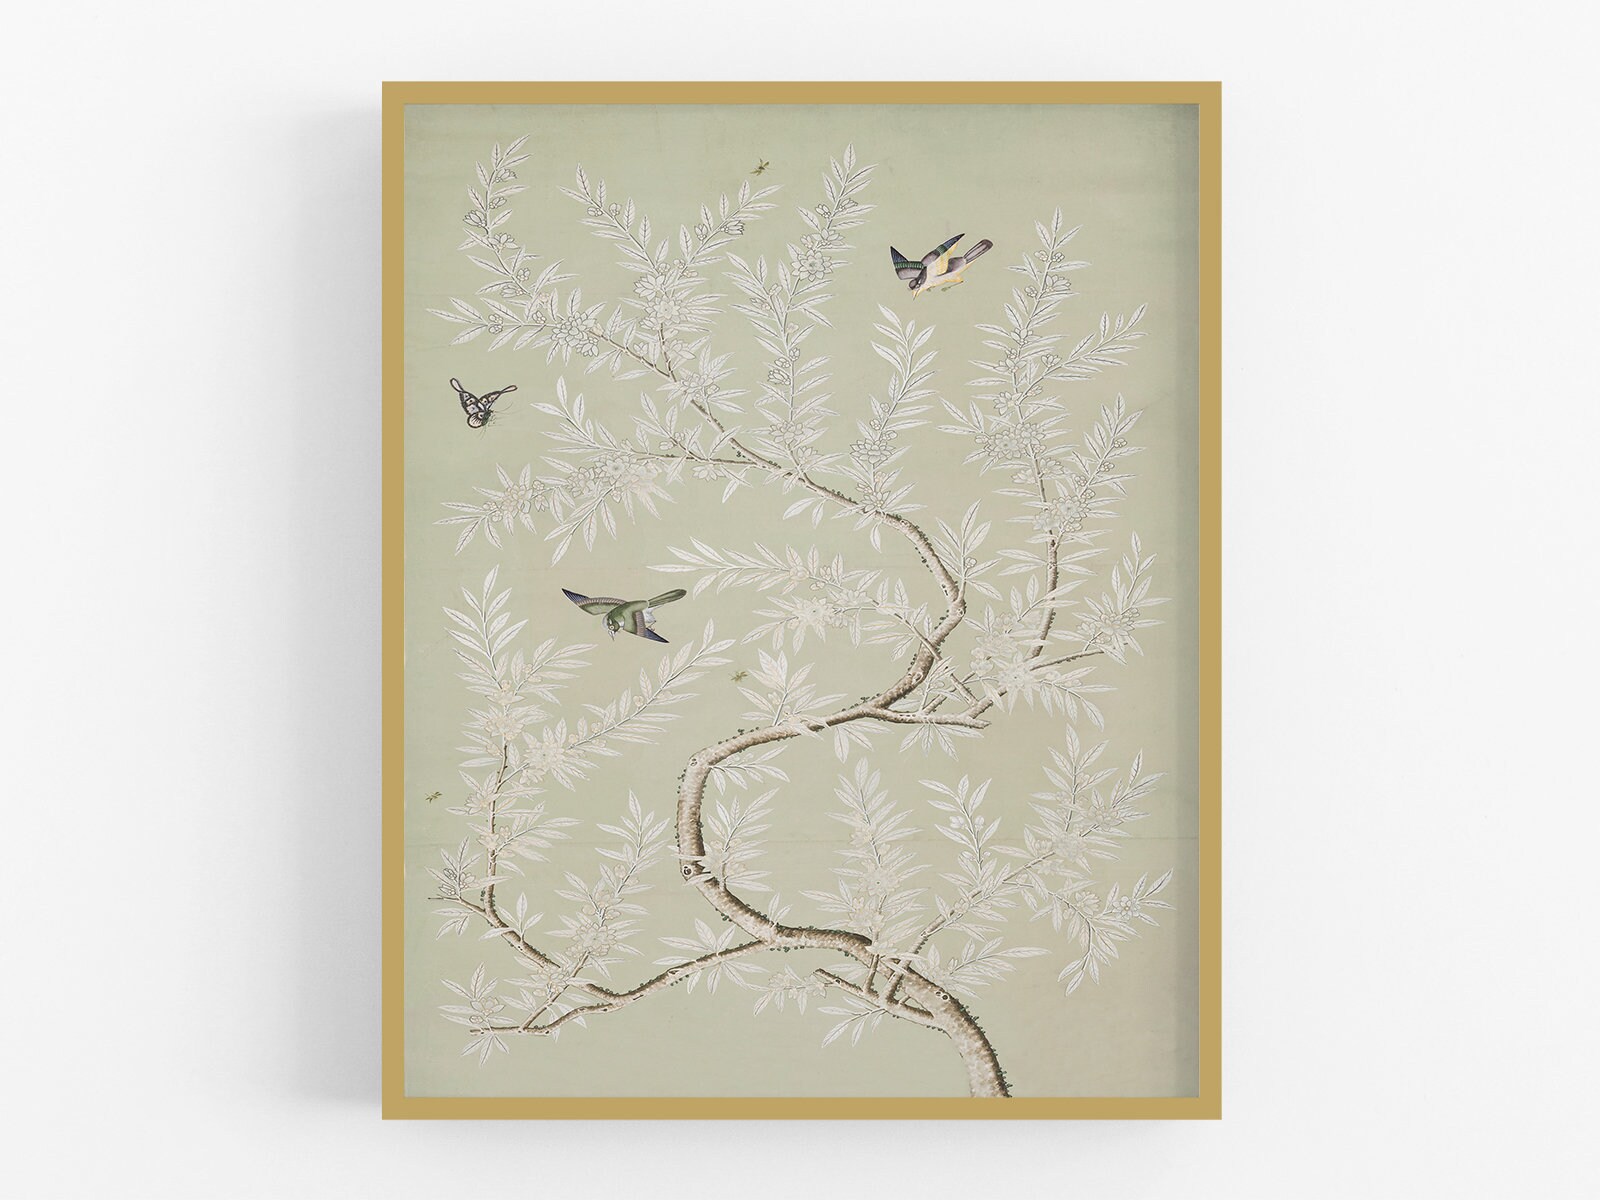 Chinese Birds and Foliage Chinoiserie Art Print / Vintage Art - Etsy